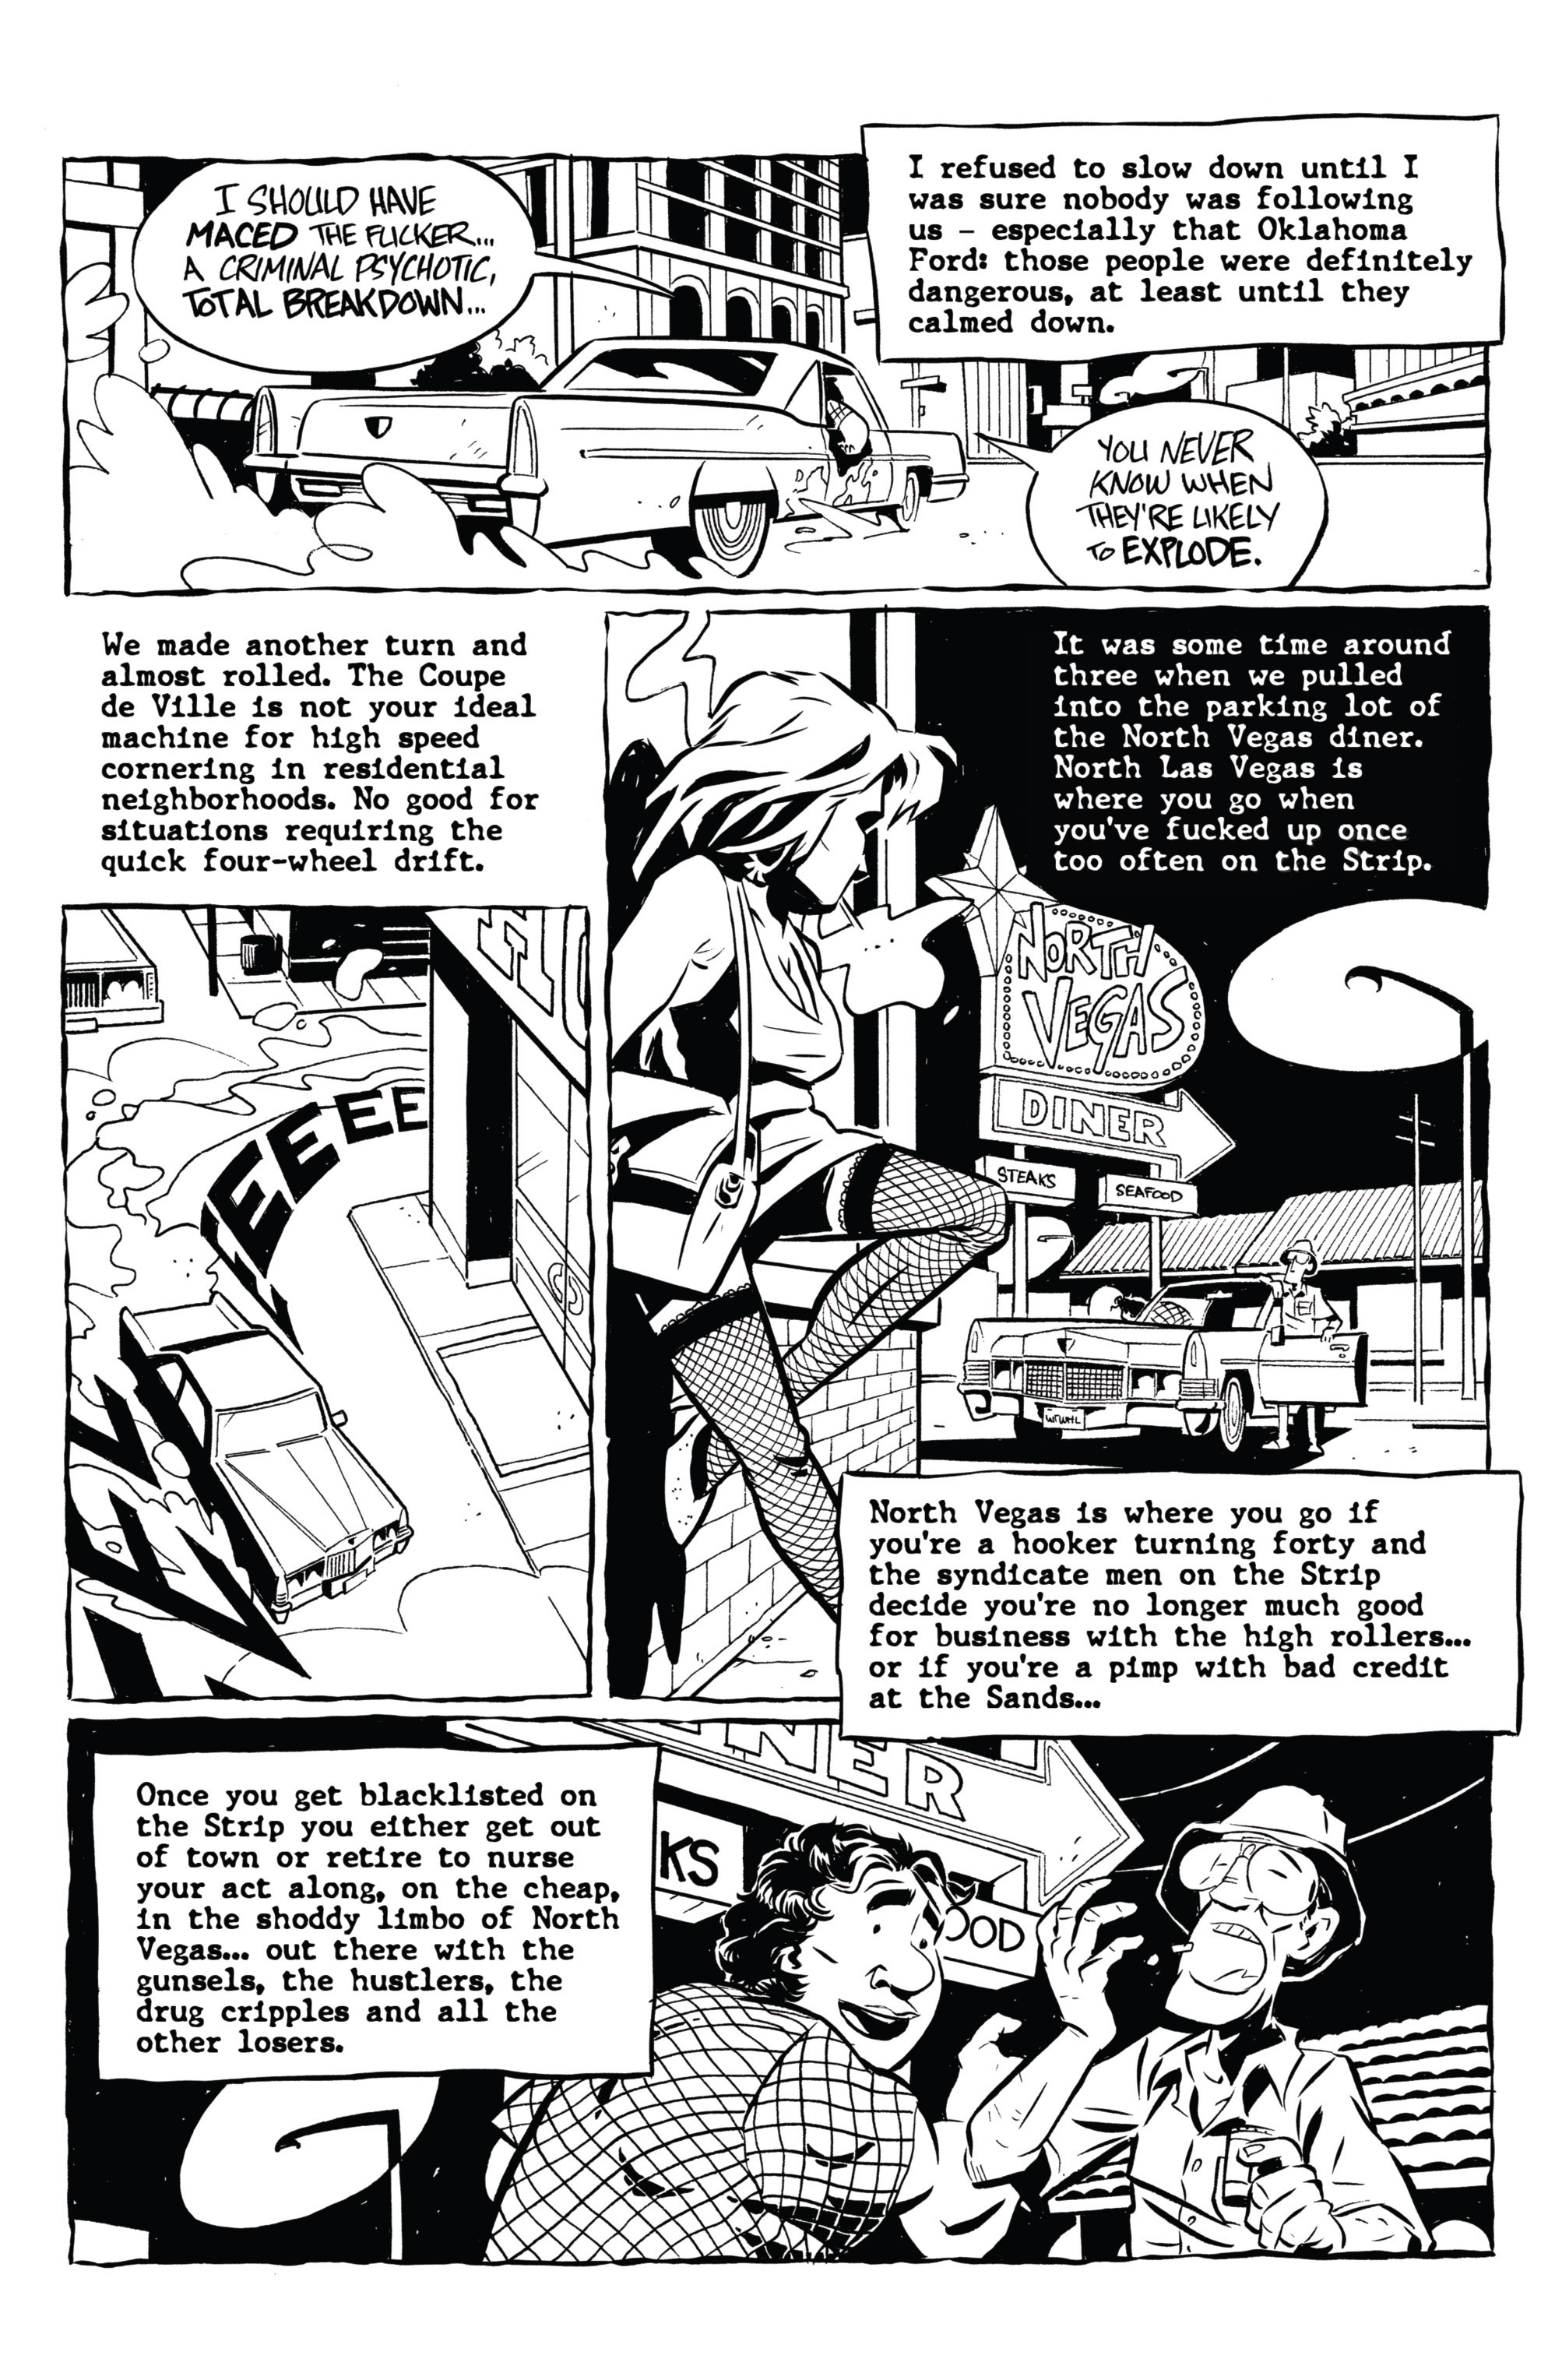 Read online Hunter S. Thompson's Fear and Loathing in Las Vegas comic -  Issue #4 - 14